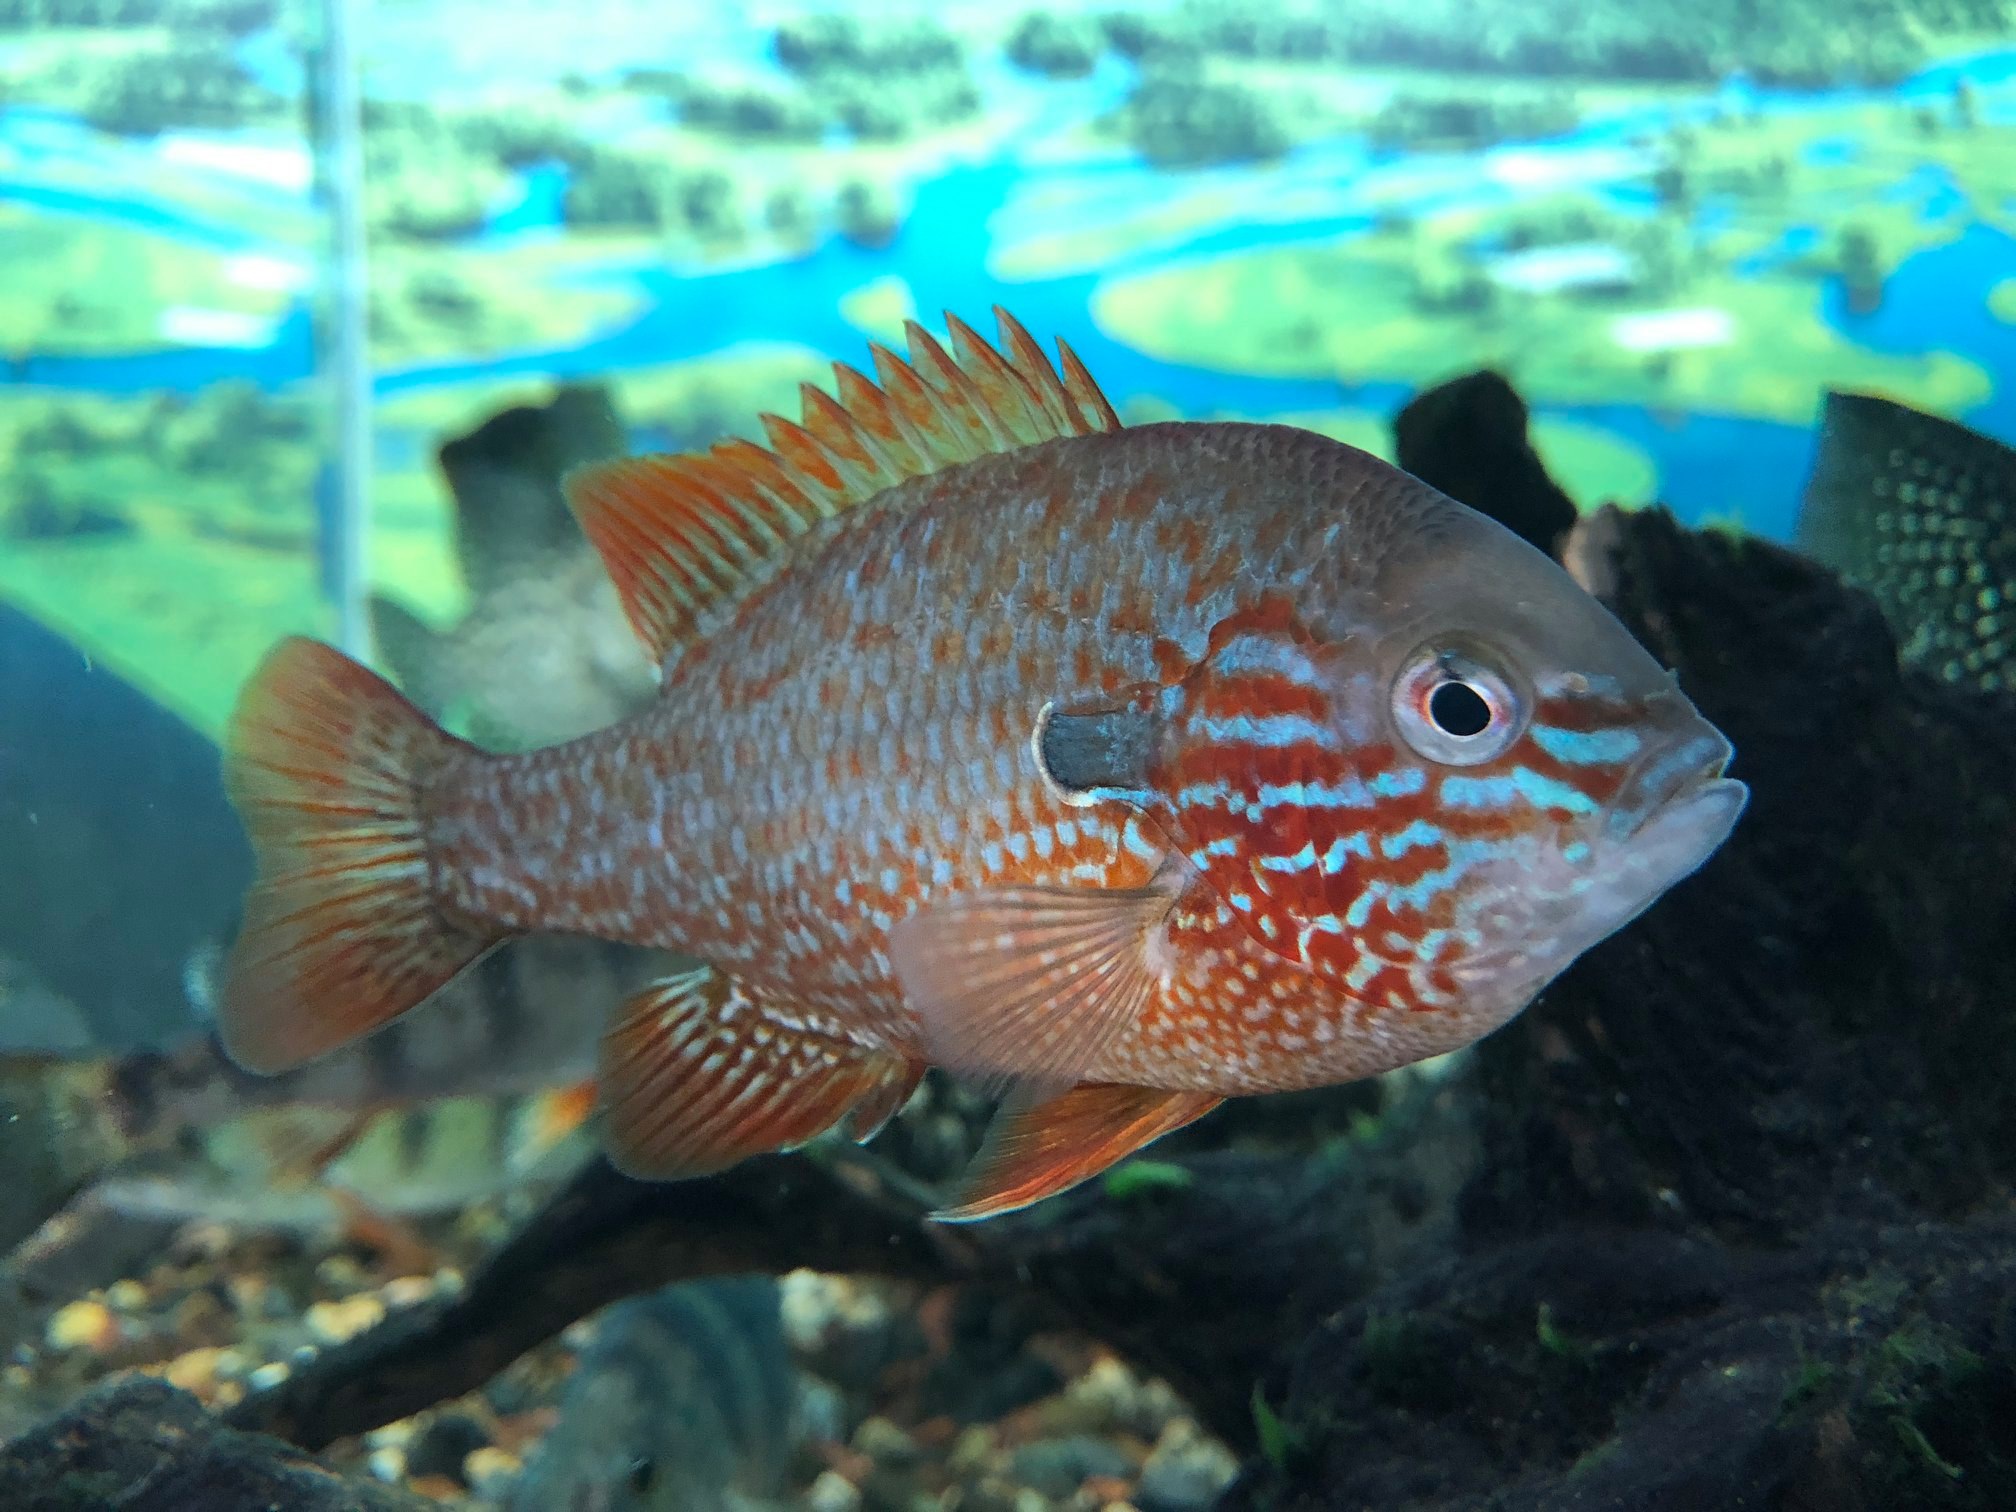 An orange spotted fish in an aquarium with river landscape background